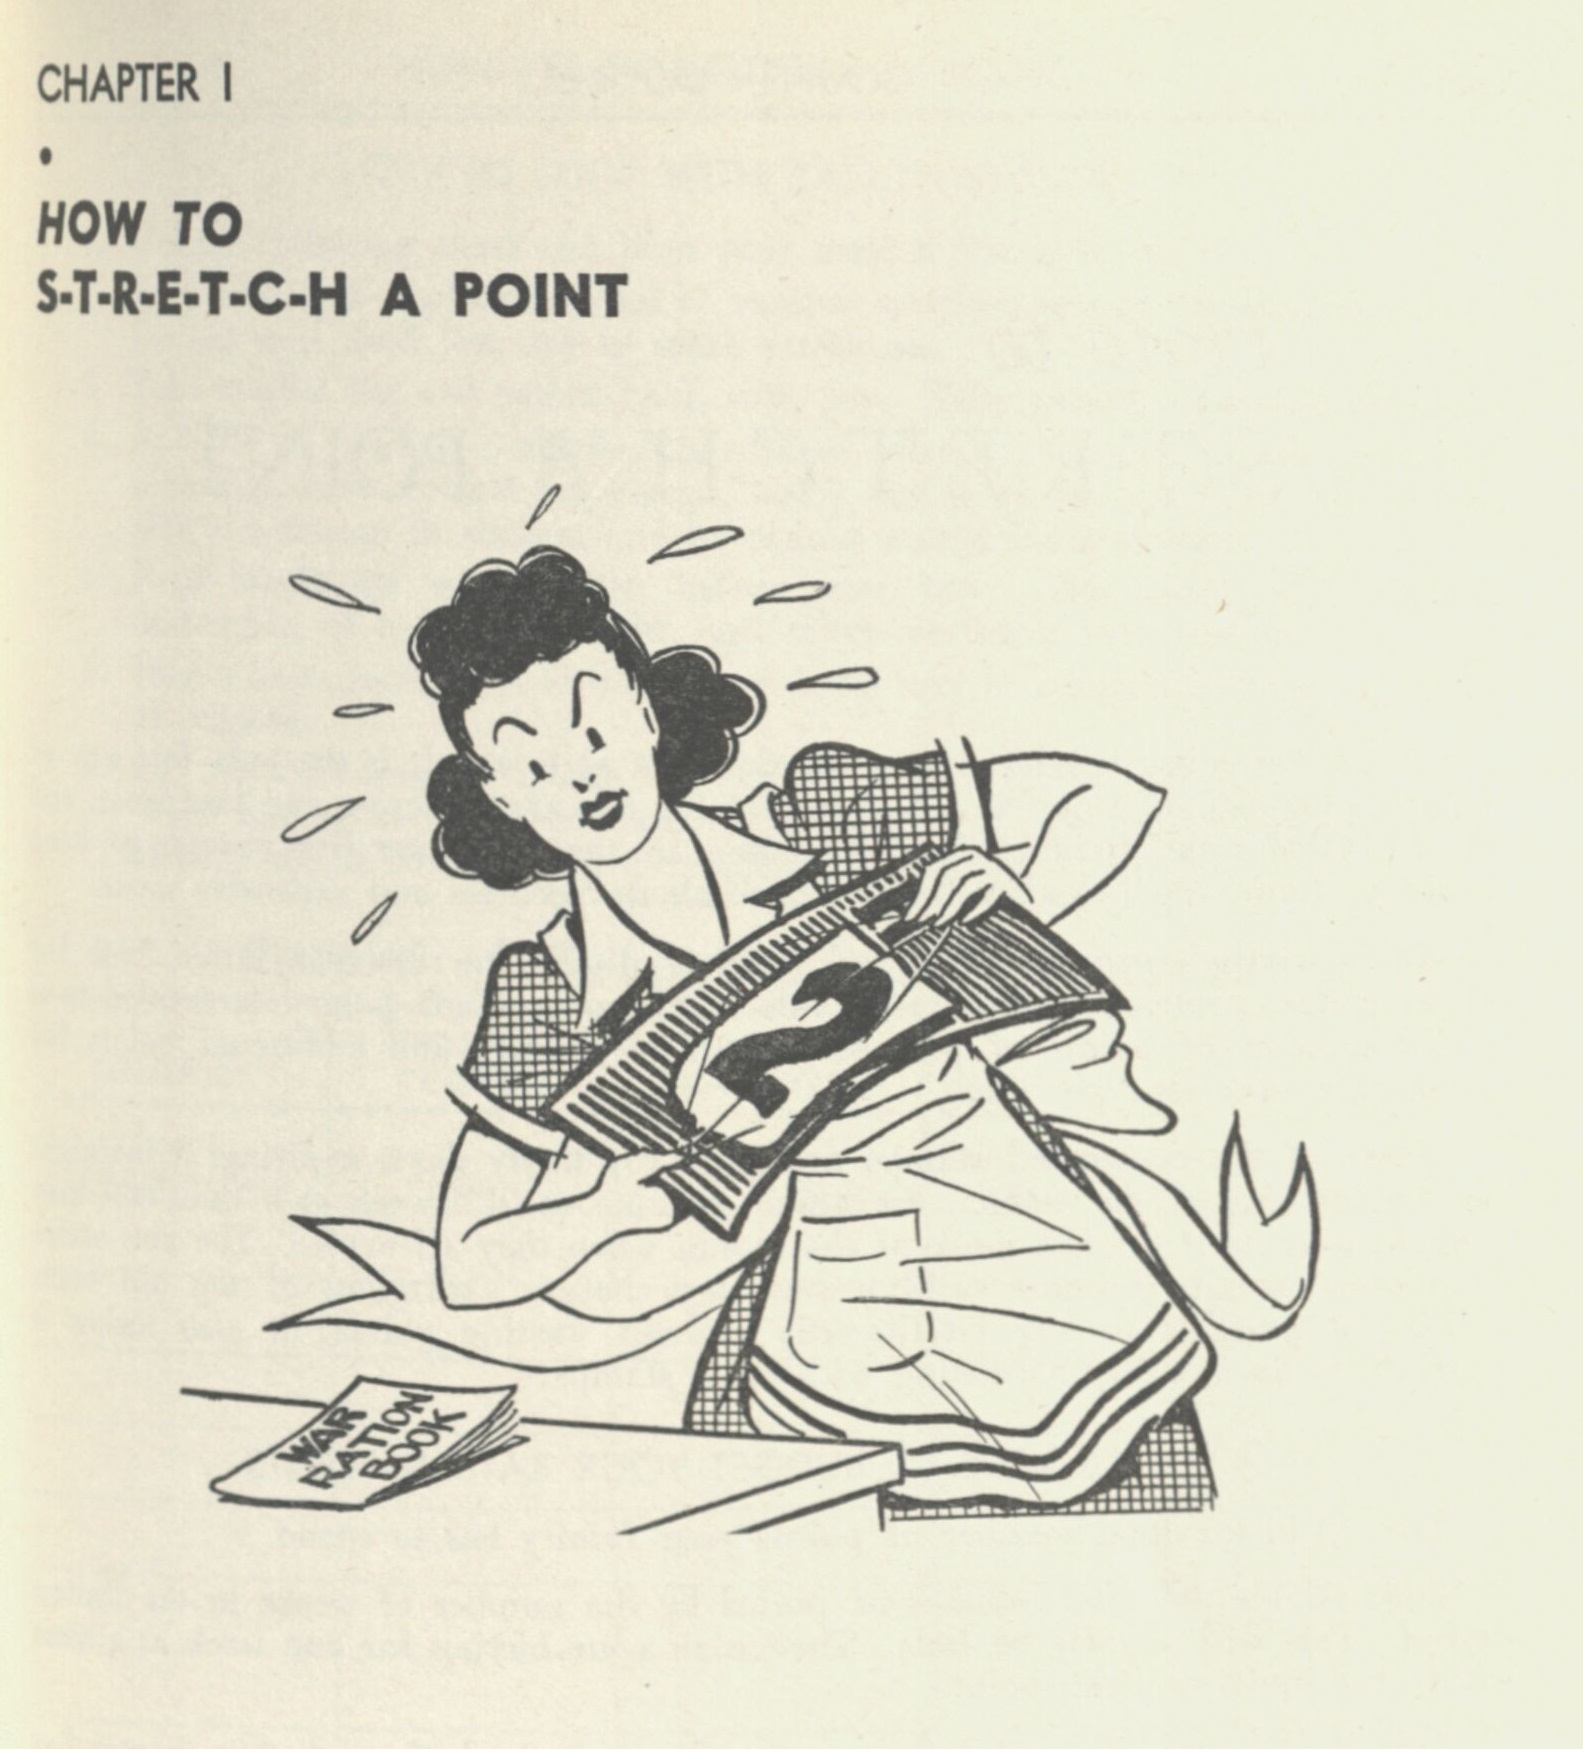 "How to Stretch a Point" cartoon from Coupon Cookery